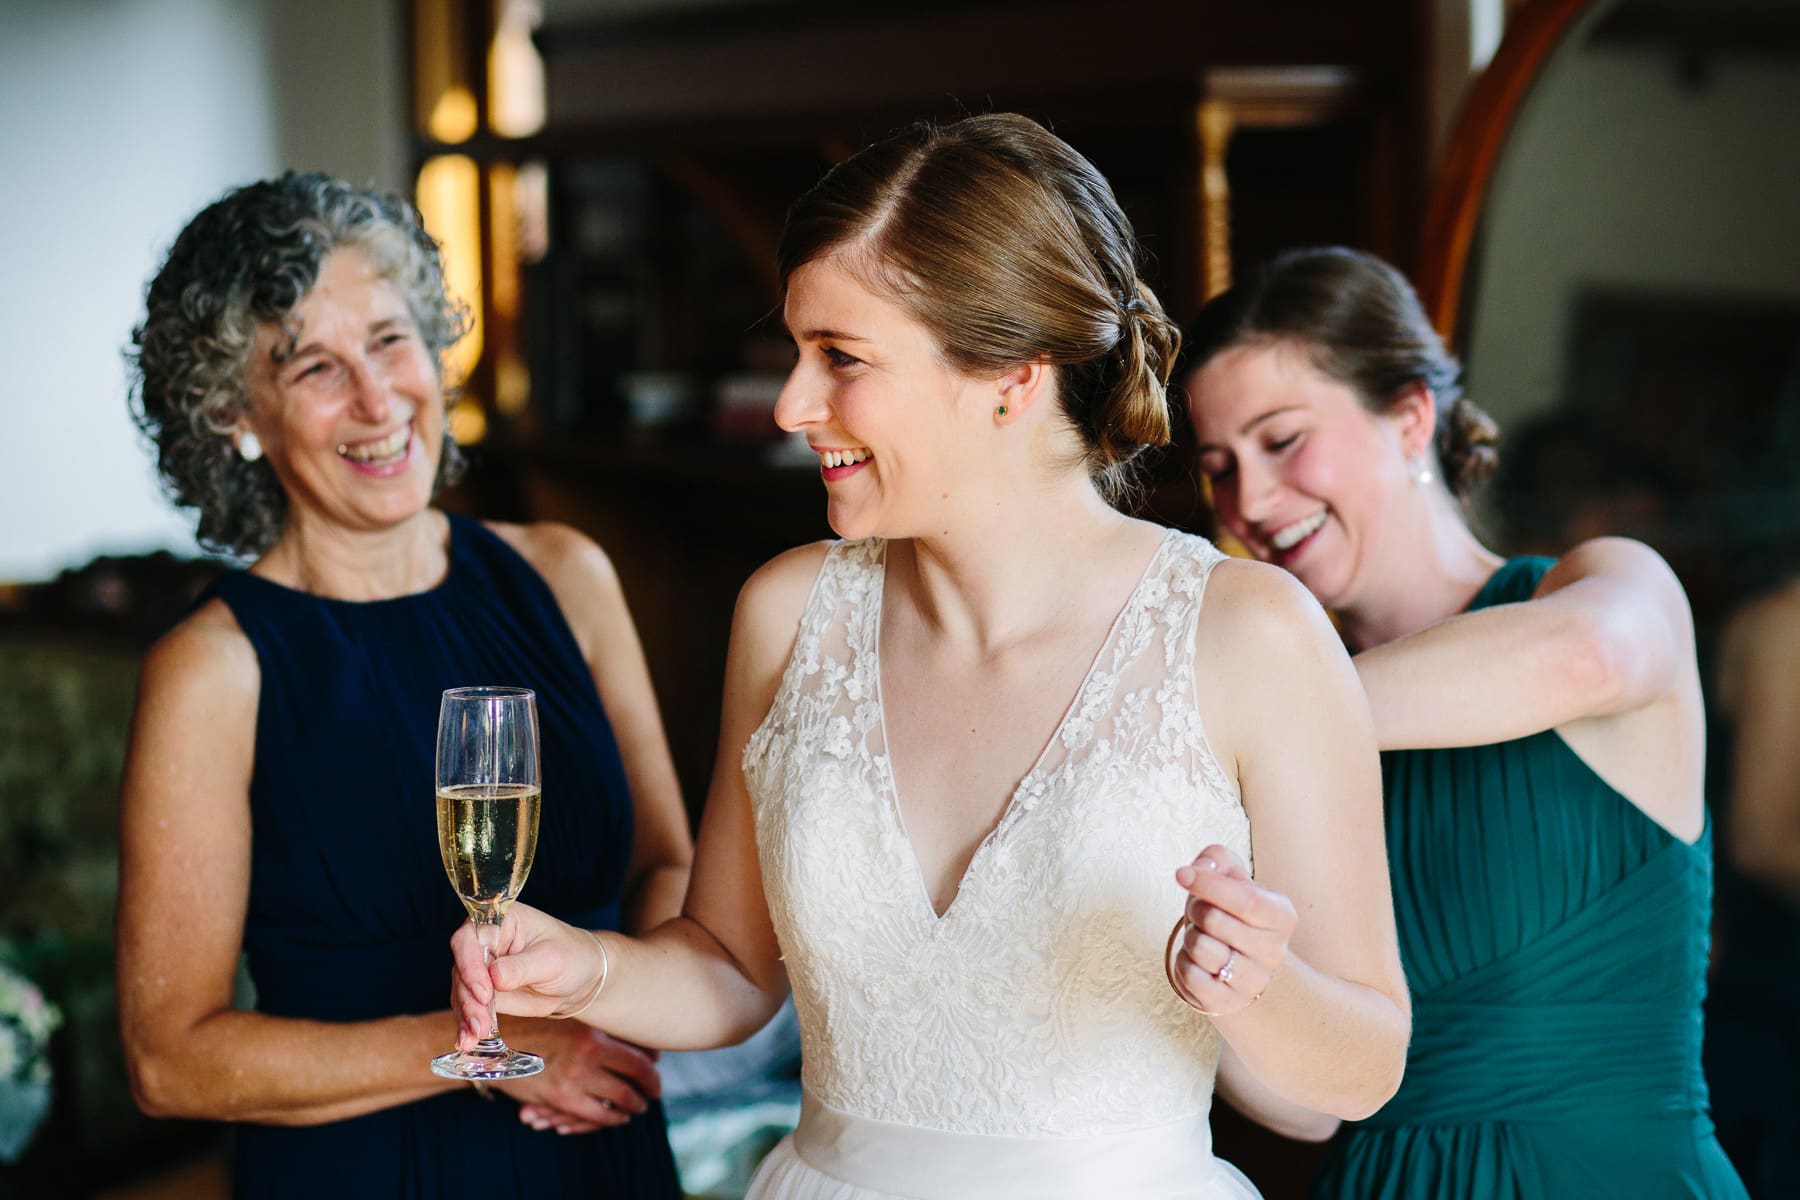 Lauren and Chuck's wedding at the Stevens Estate in North Andover, MA | Kelly Benvenuto Photography | Boston Wedding Photographer